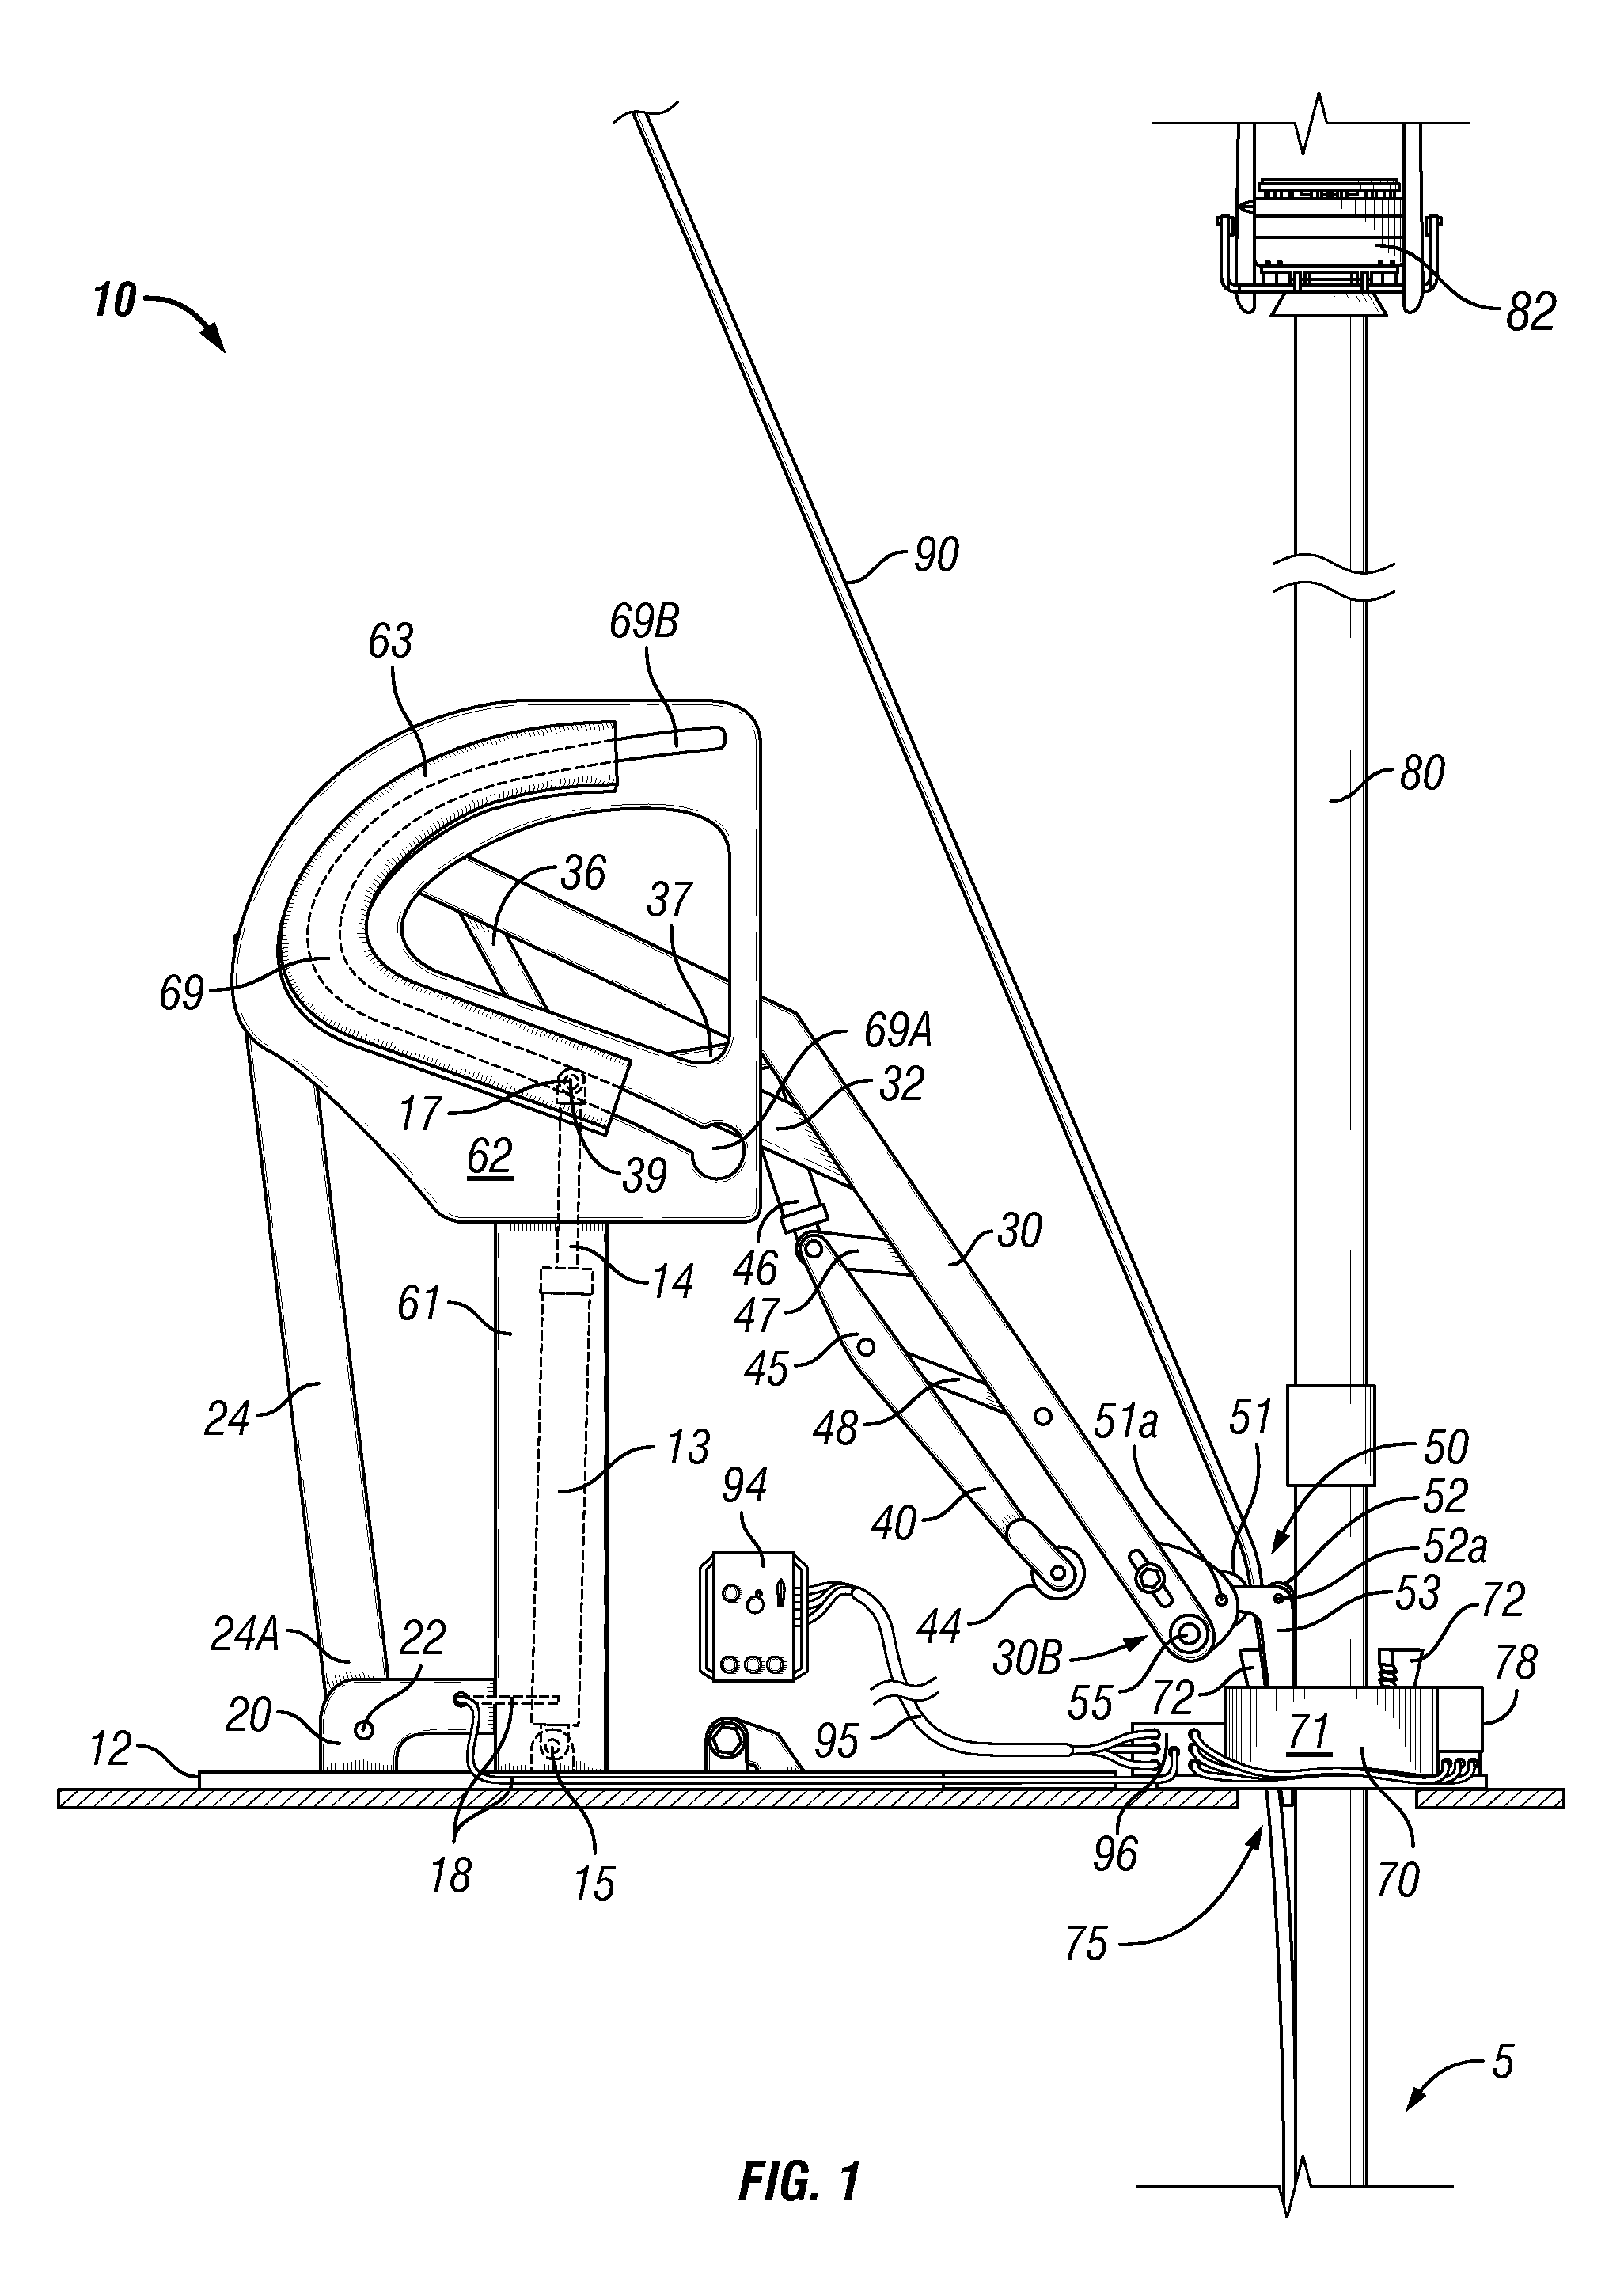 Method And Apparatus To Position And Protect Control Lines Being Coupled To A Pipe String On A Rig